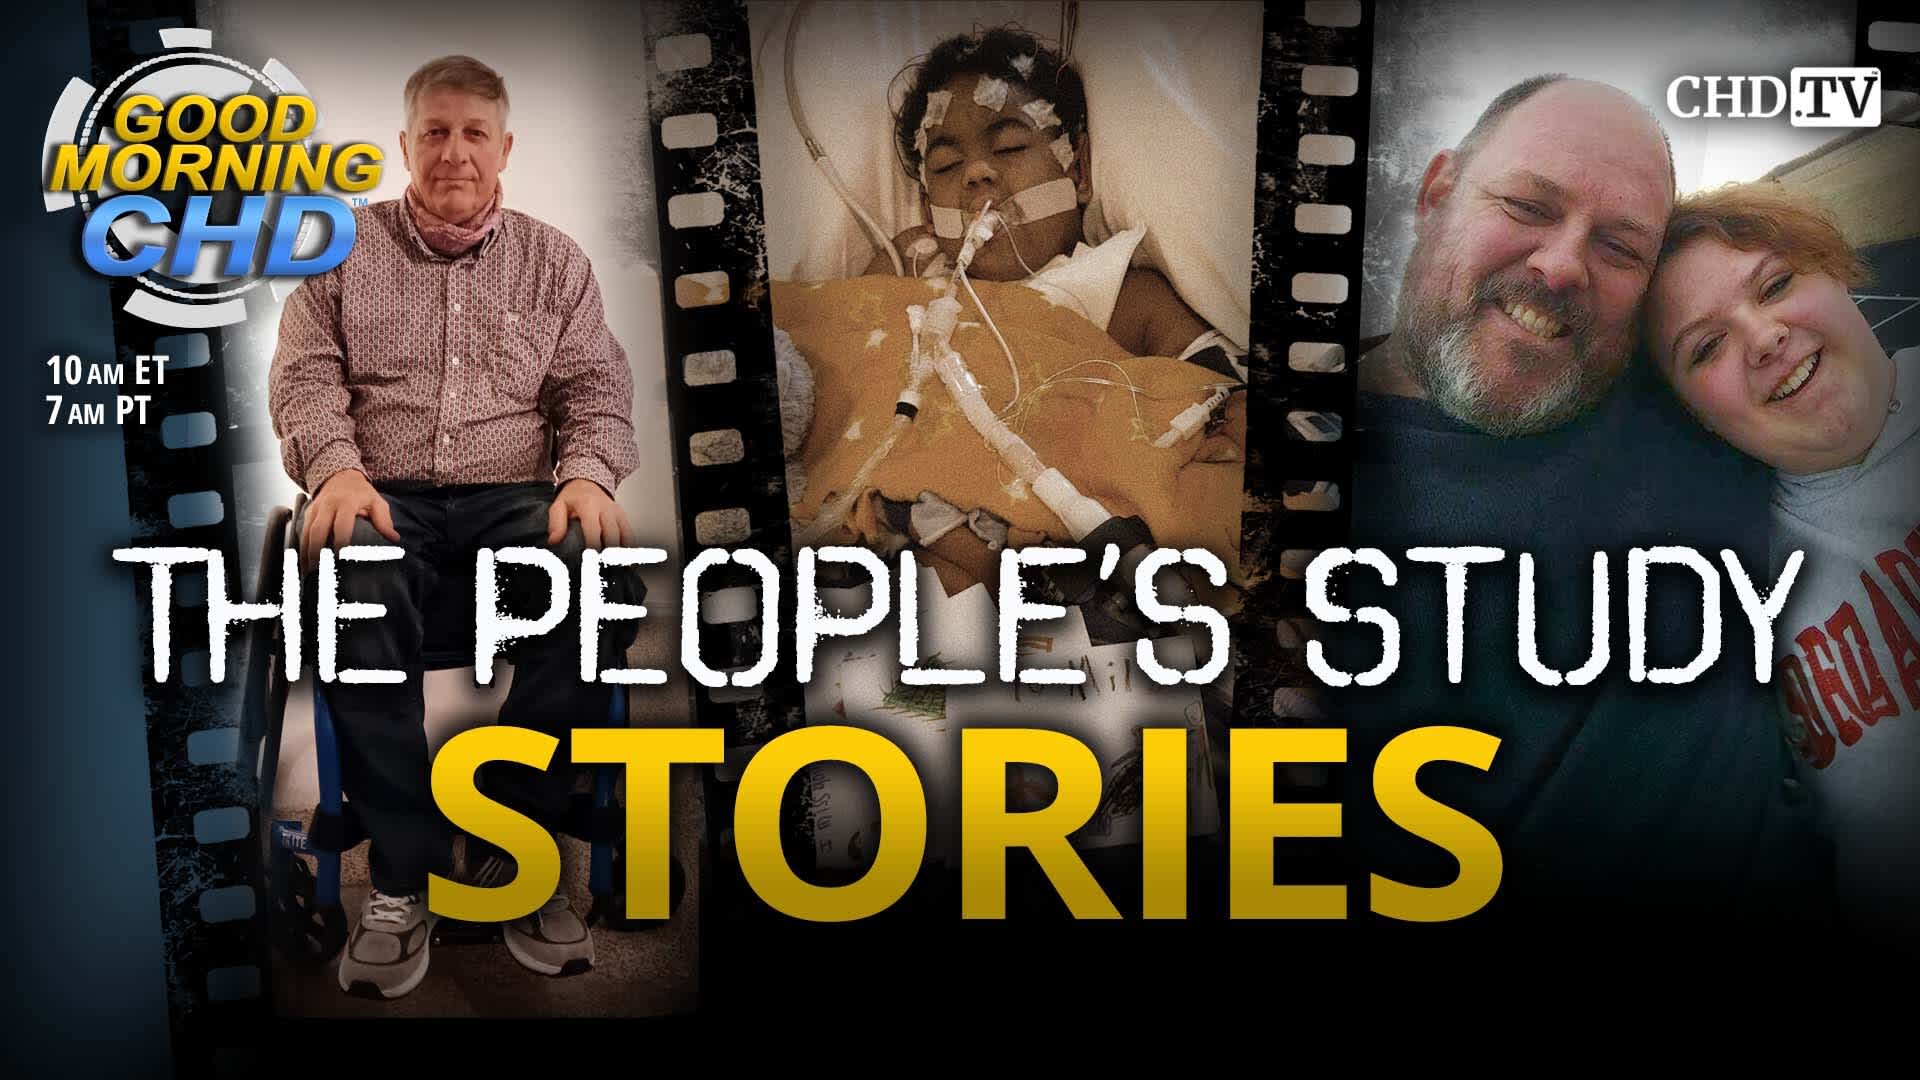 The People's Study Stories